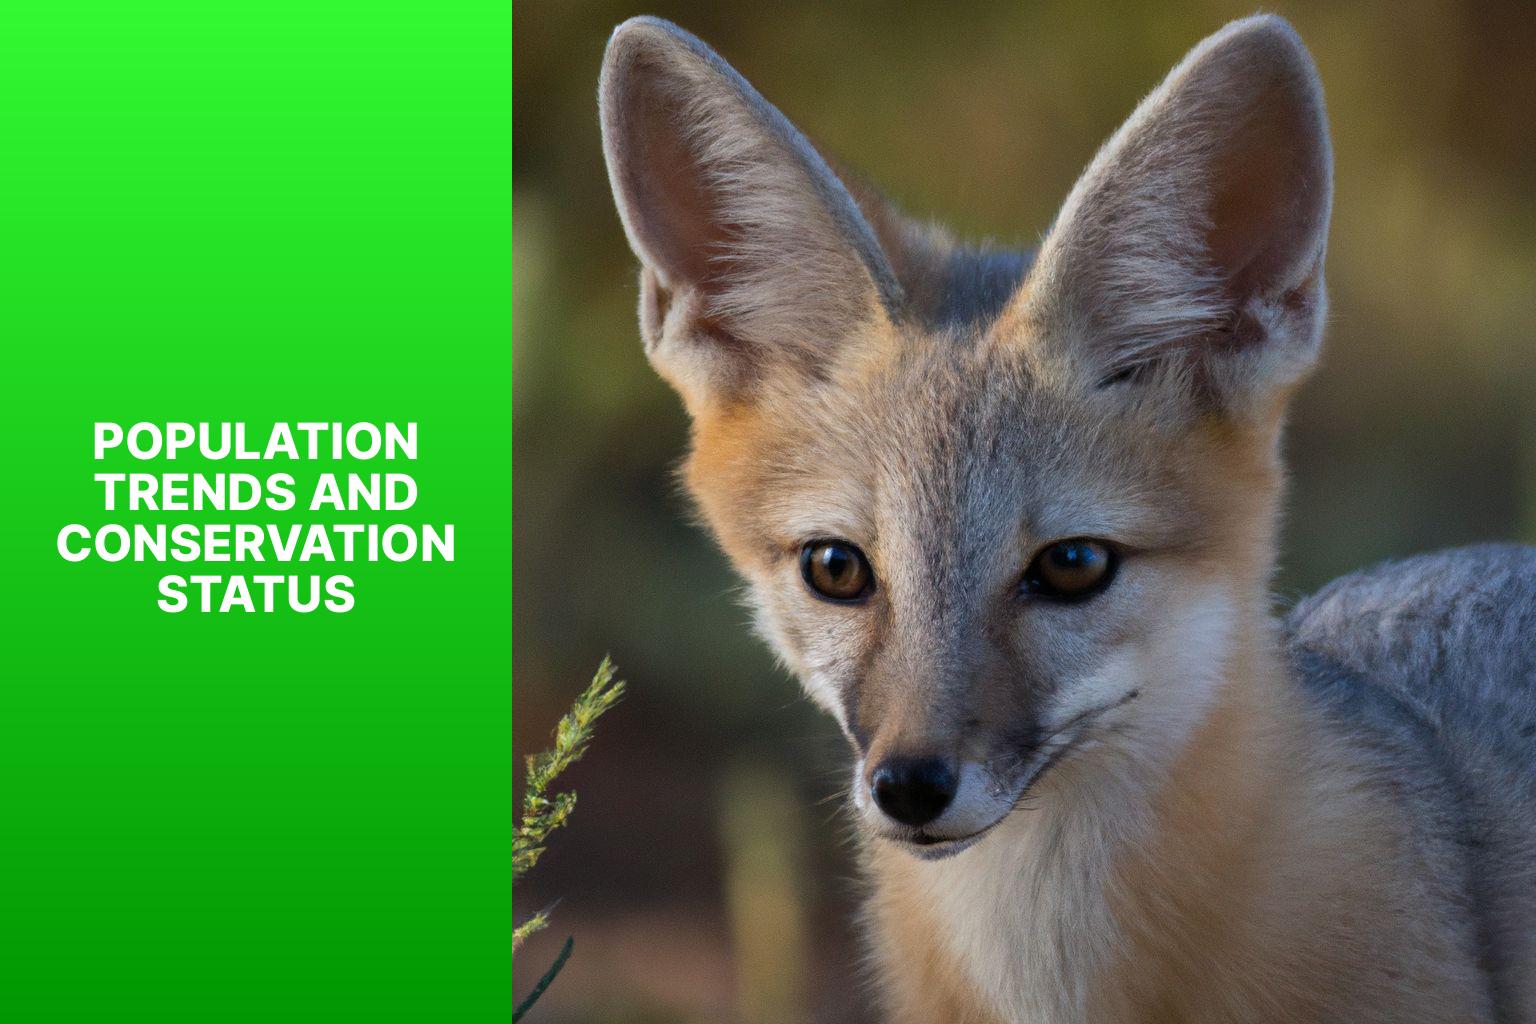 Population Trends and Conservation Status - Kit Fox Population 